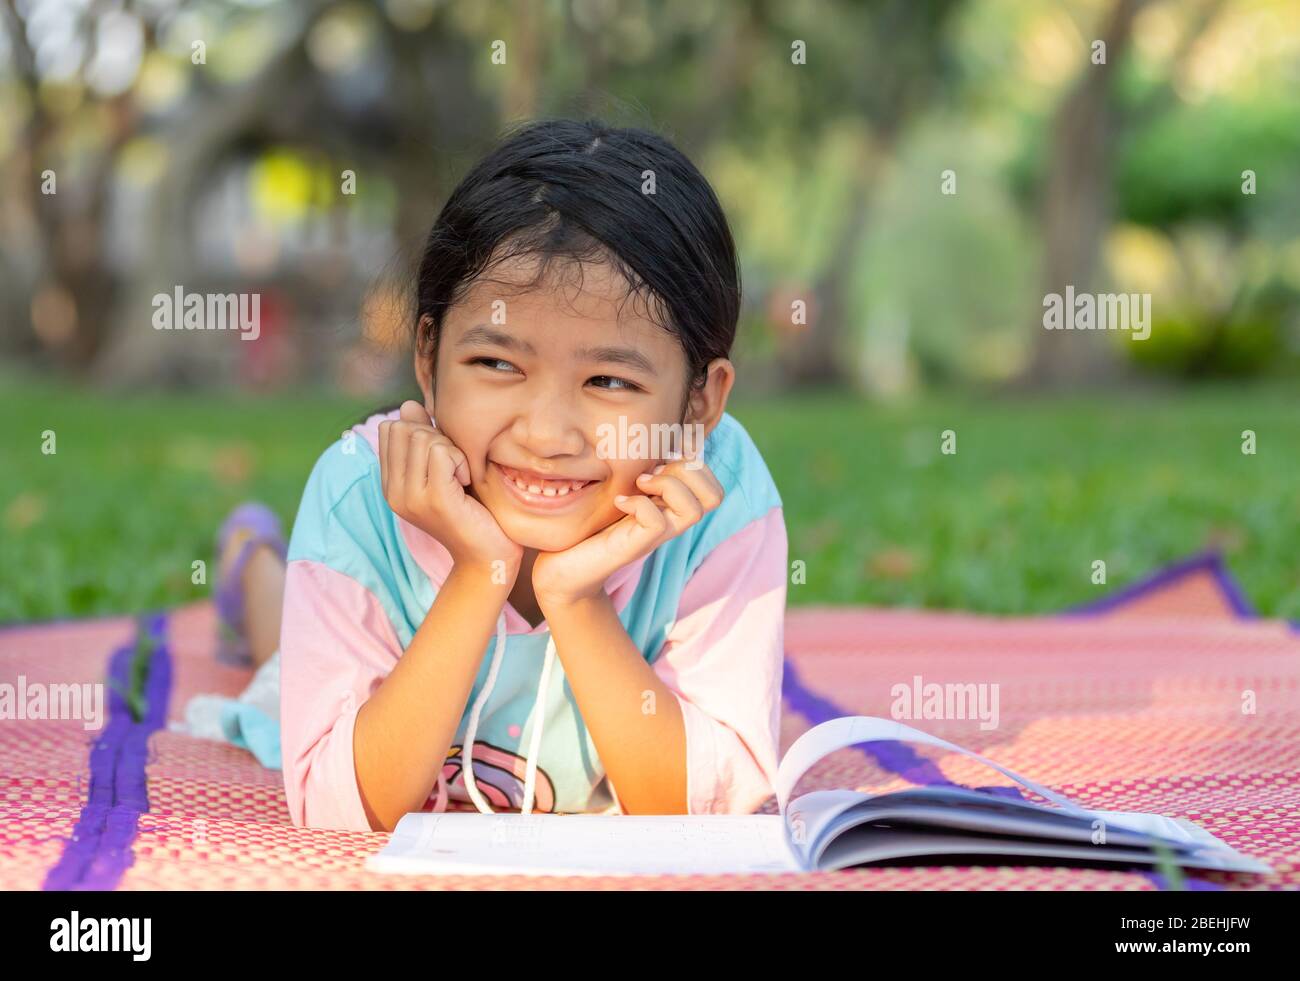 The Asian little girl lay down and put her hand under the chin on the book with a smile on the lawn with sunray in the garden. The kid reading a book Stock Photo